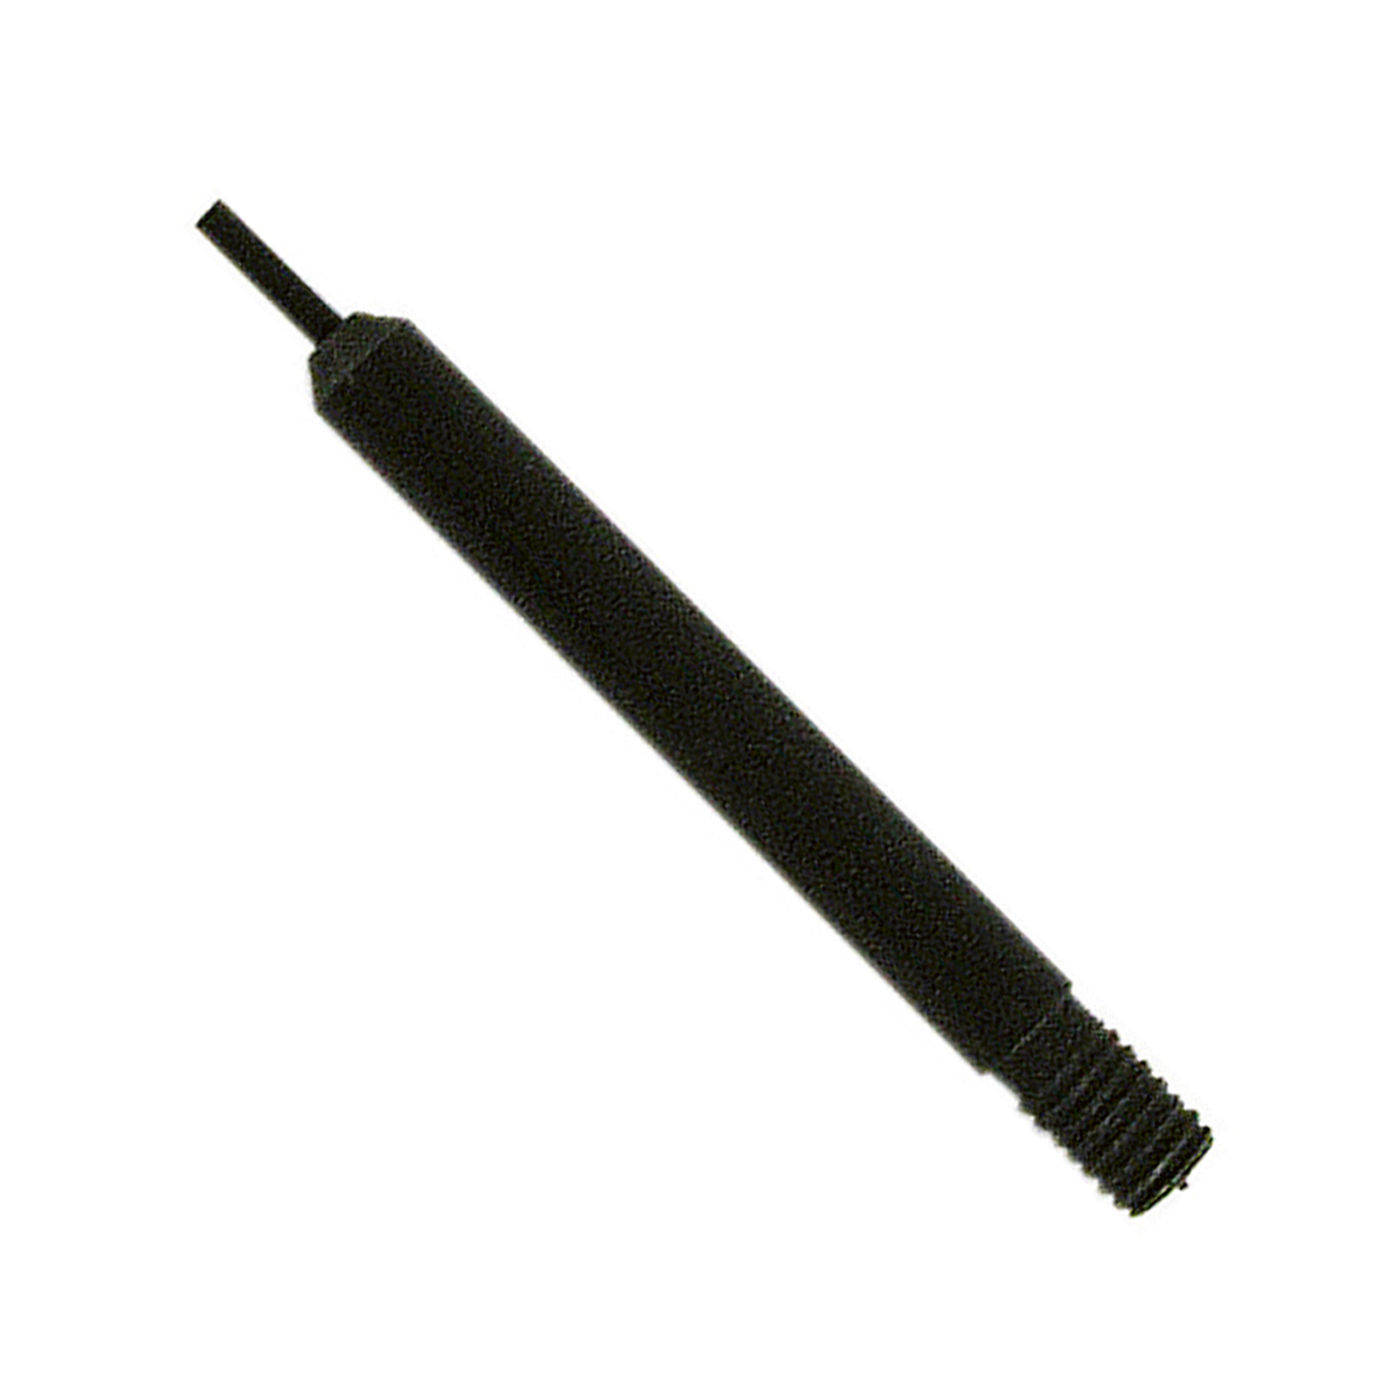 Spare Insert, Pin-Shaped, for Spring Bar Tool - 1 piece